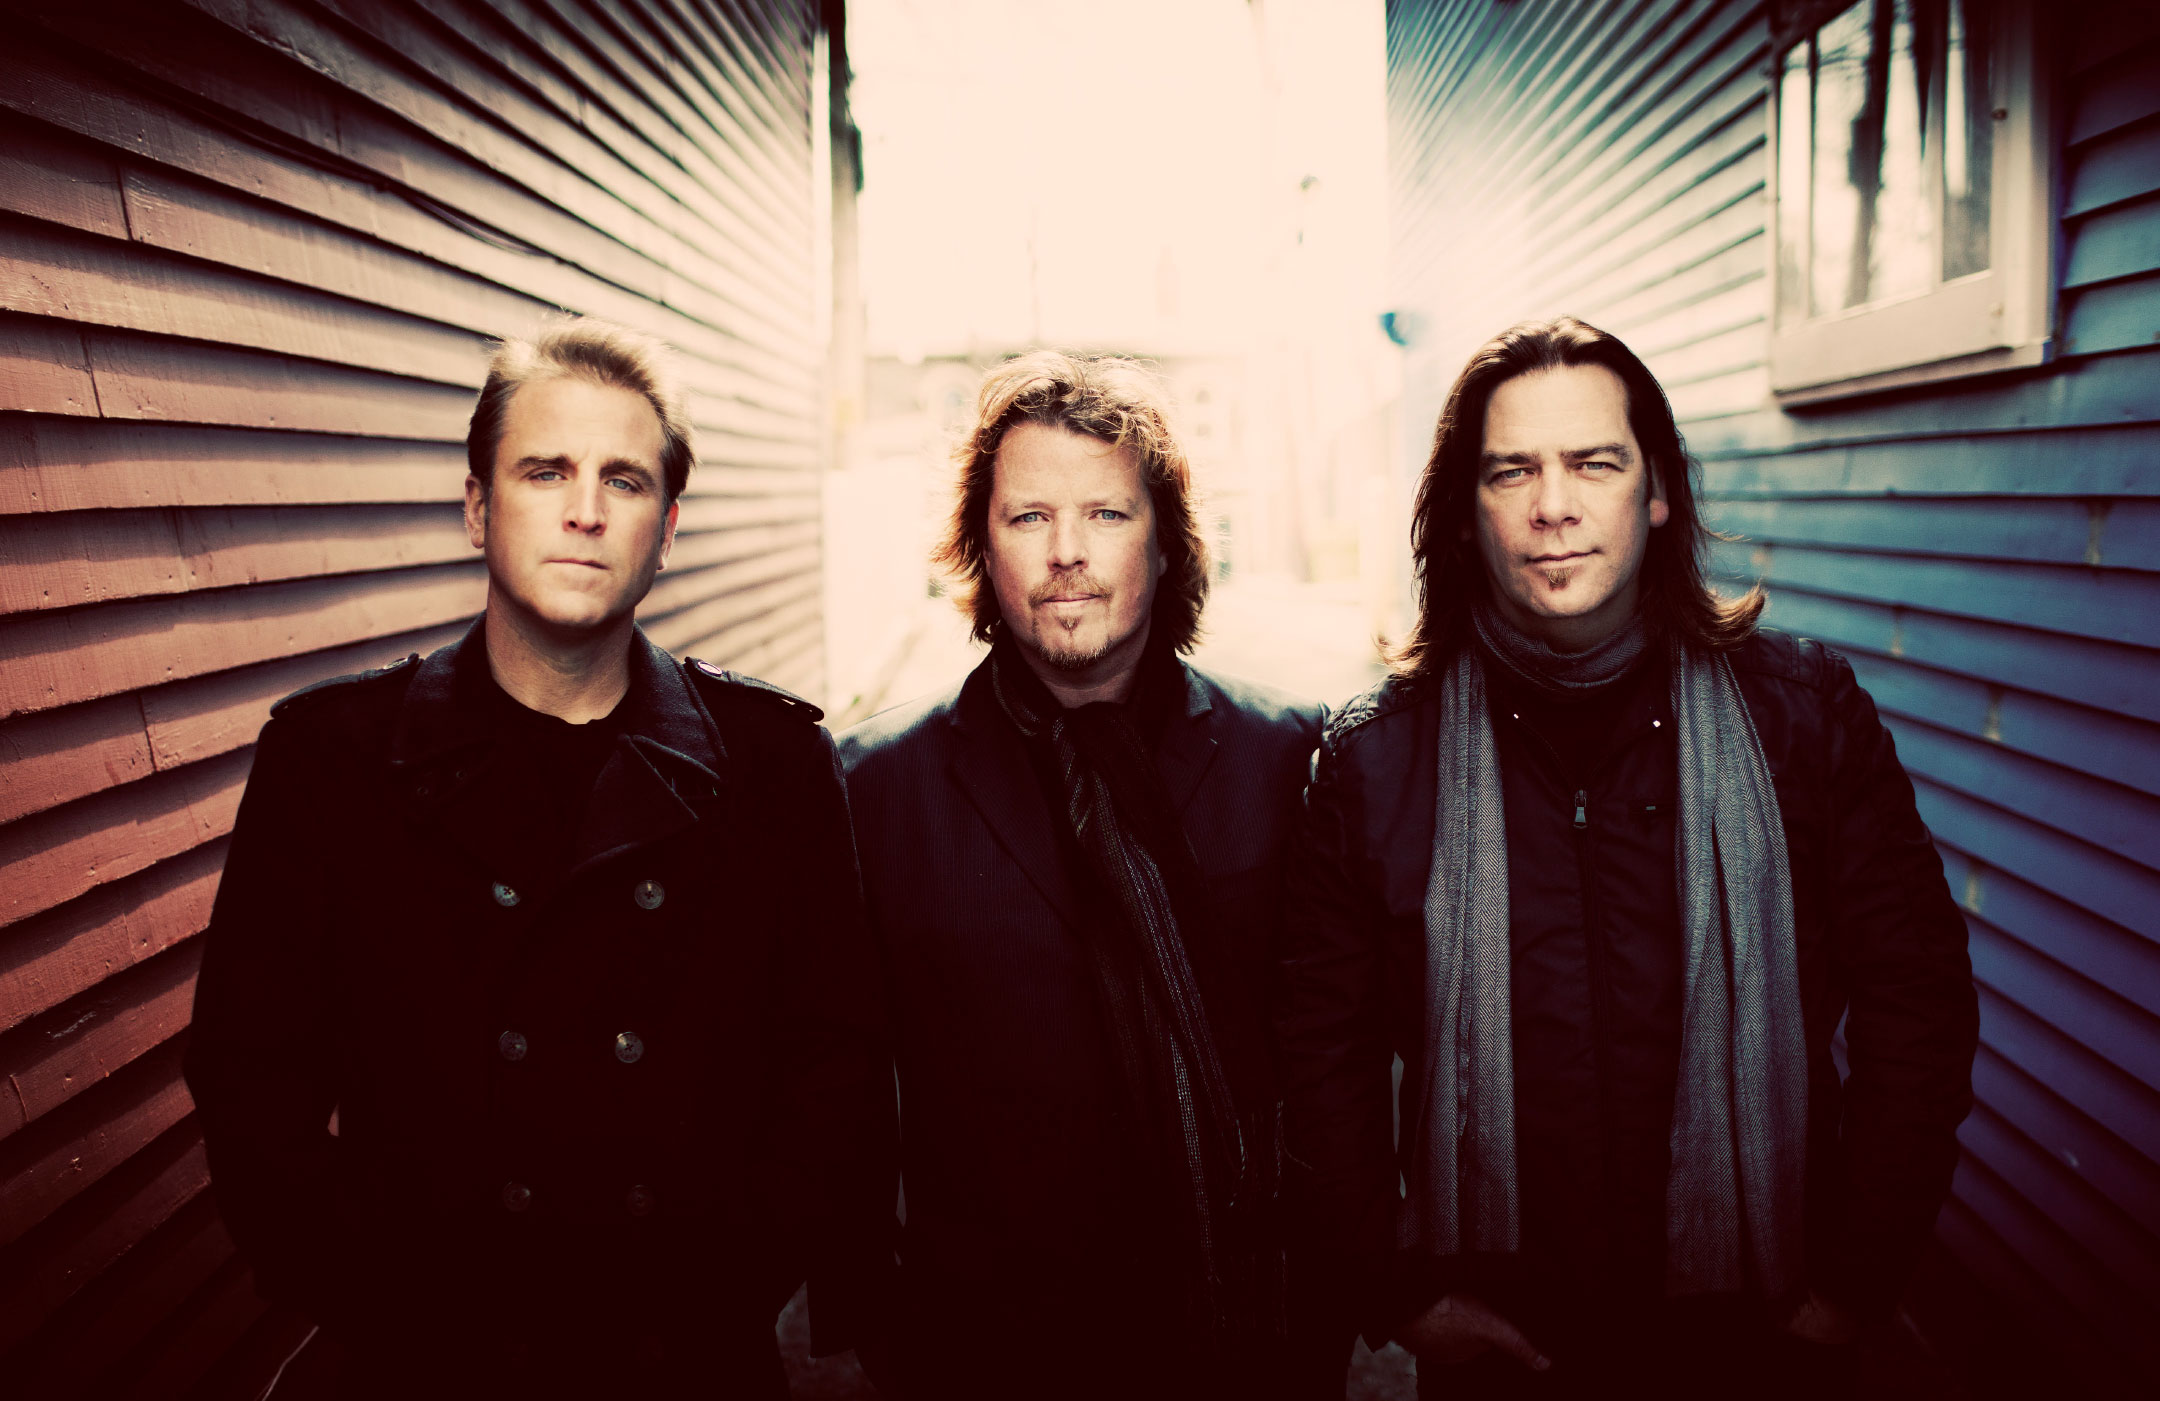 Great Big Sea band picture in an urban setting.